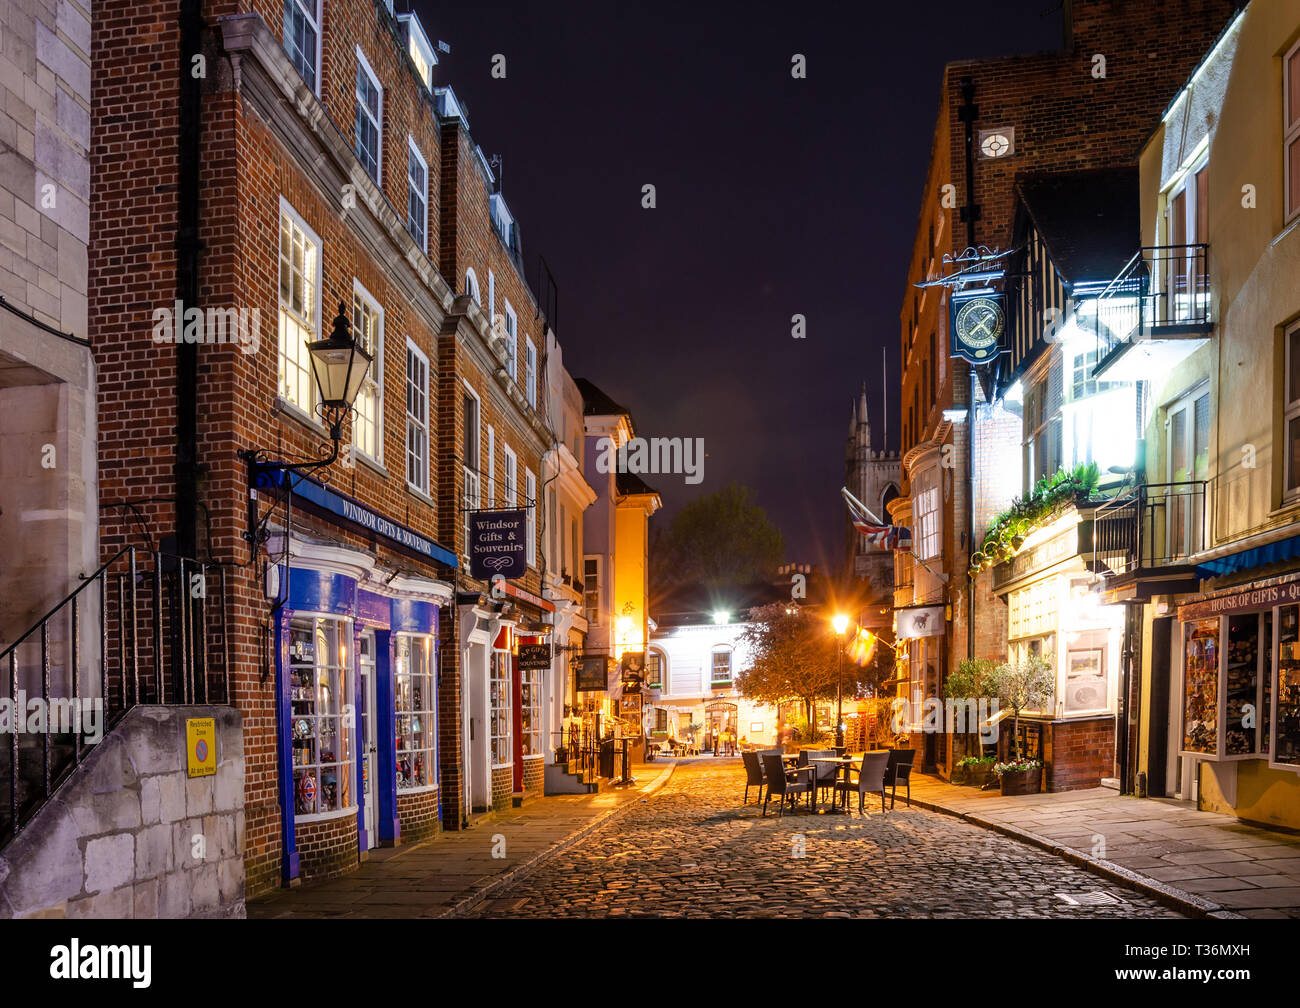 Church Street in Windsor, Berkshire, UK at night. Church Street is a cobbled, pedestrianized street with pubs, restaurants and tourist shops. Stock Photo